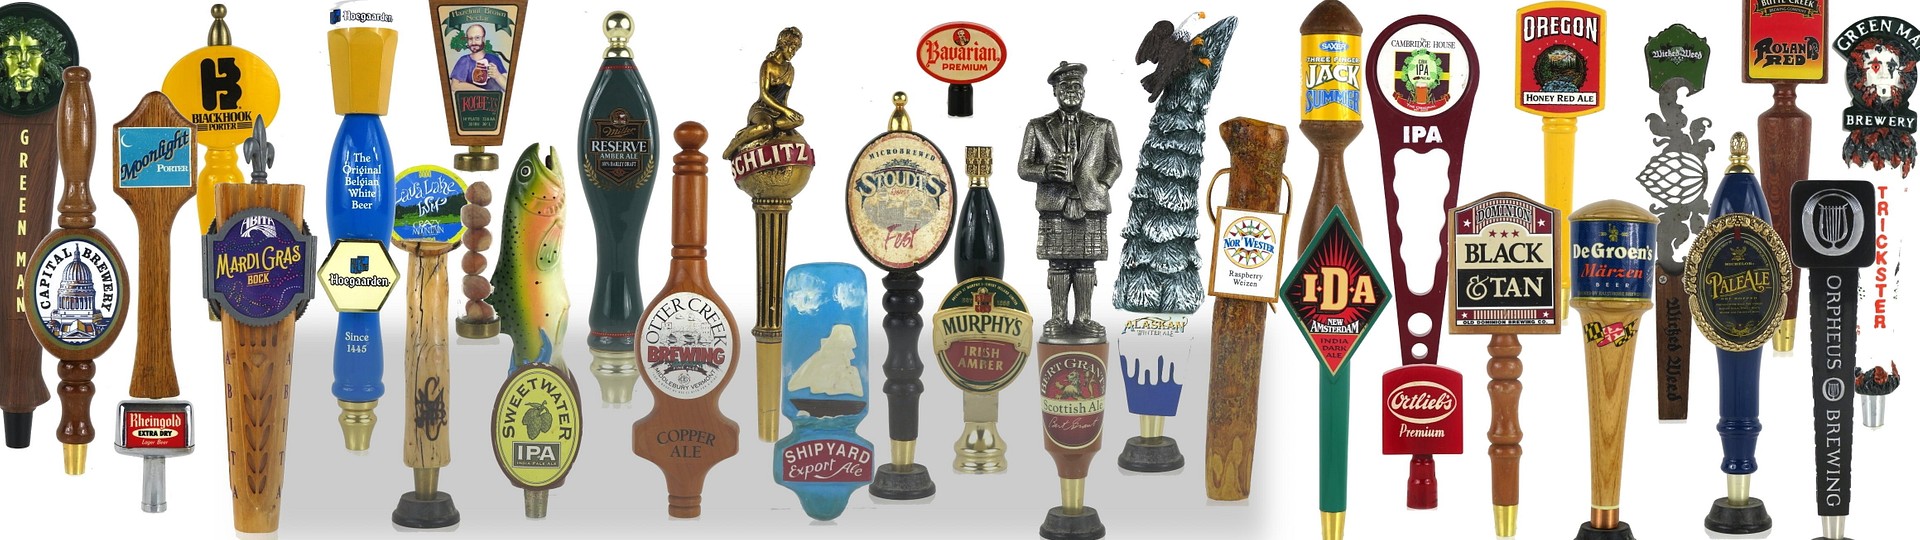 TavernTrove's Vintage US, Craft Brewery, and Foreign Beer Tap Auction (Day 2) by TavernTrove